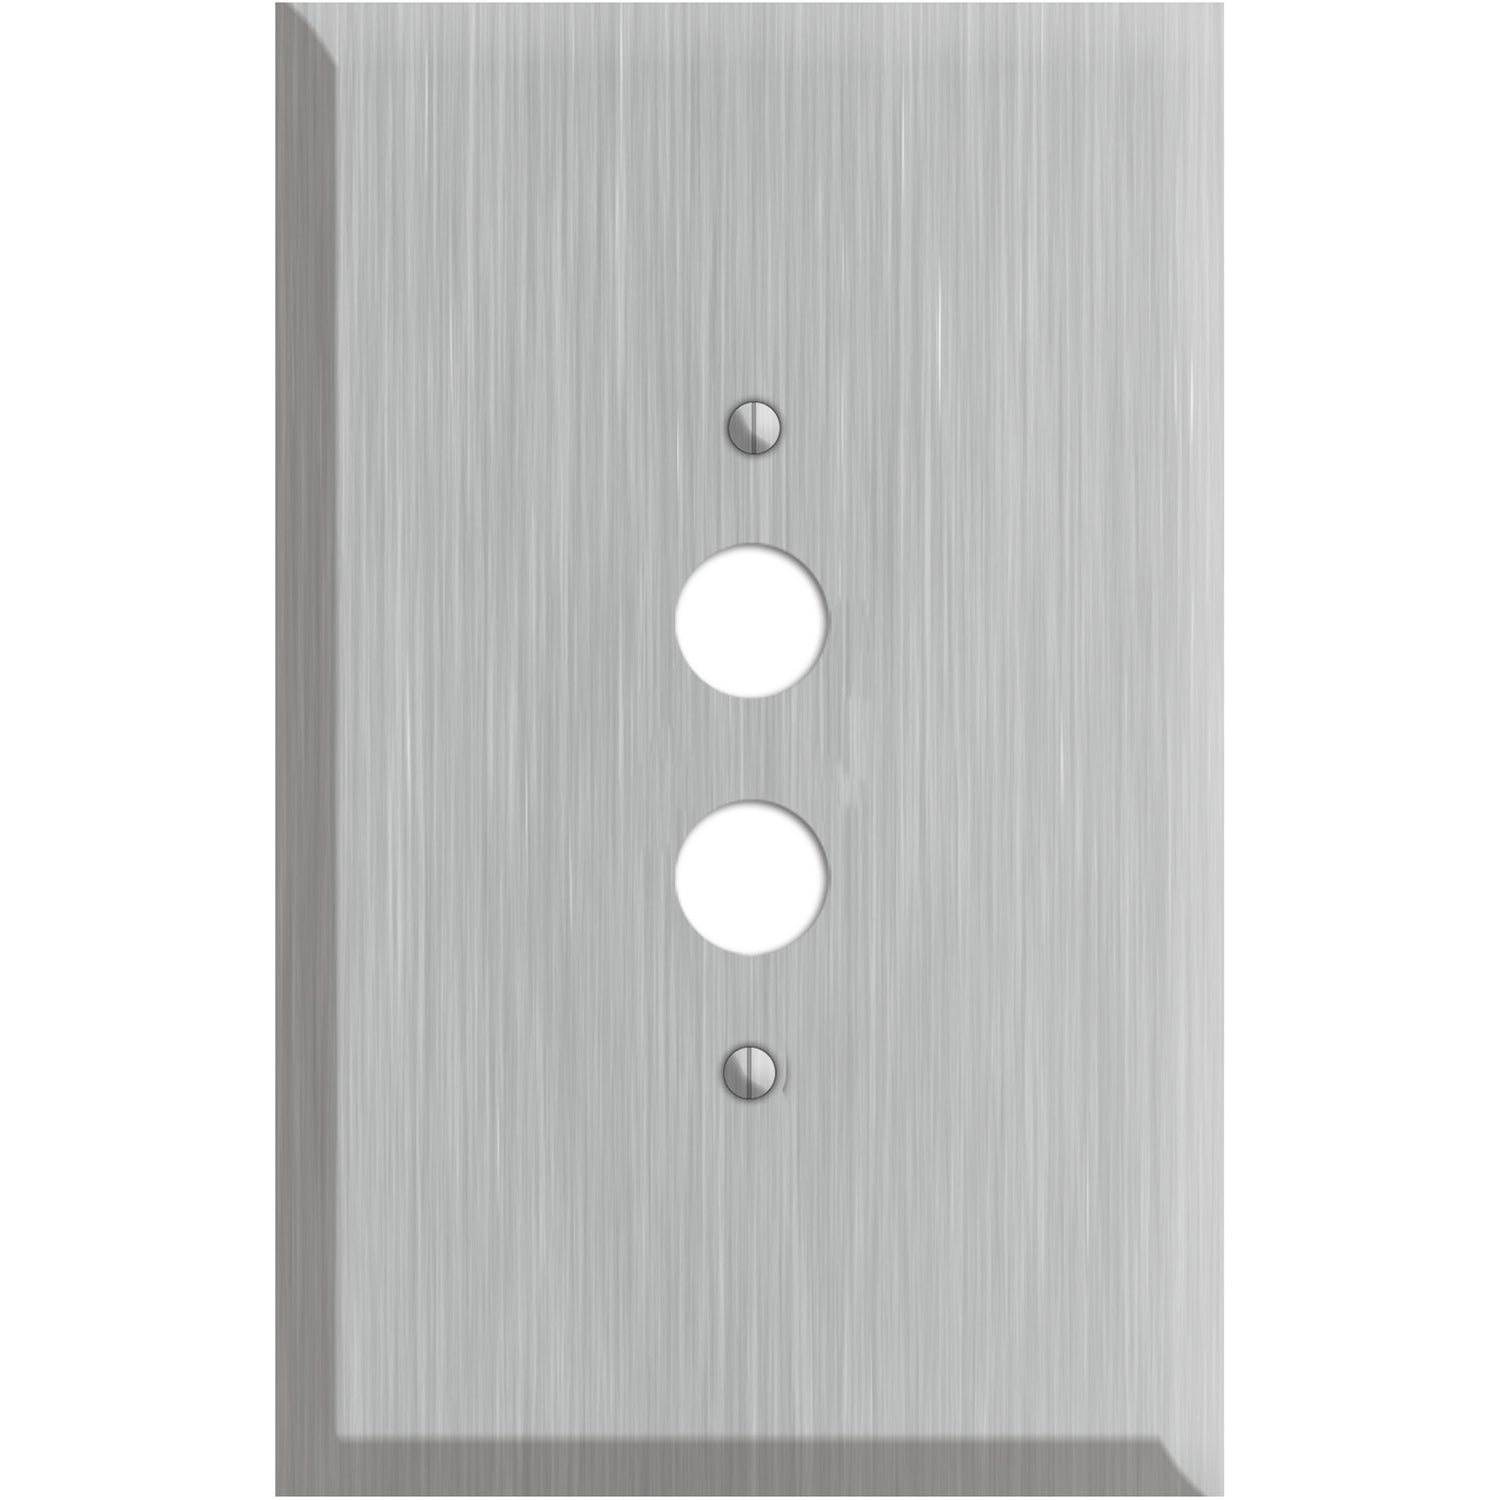 Oversized Discontinued Stainless Steel 1 Pushbutton Wallplate